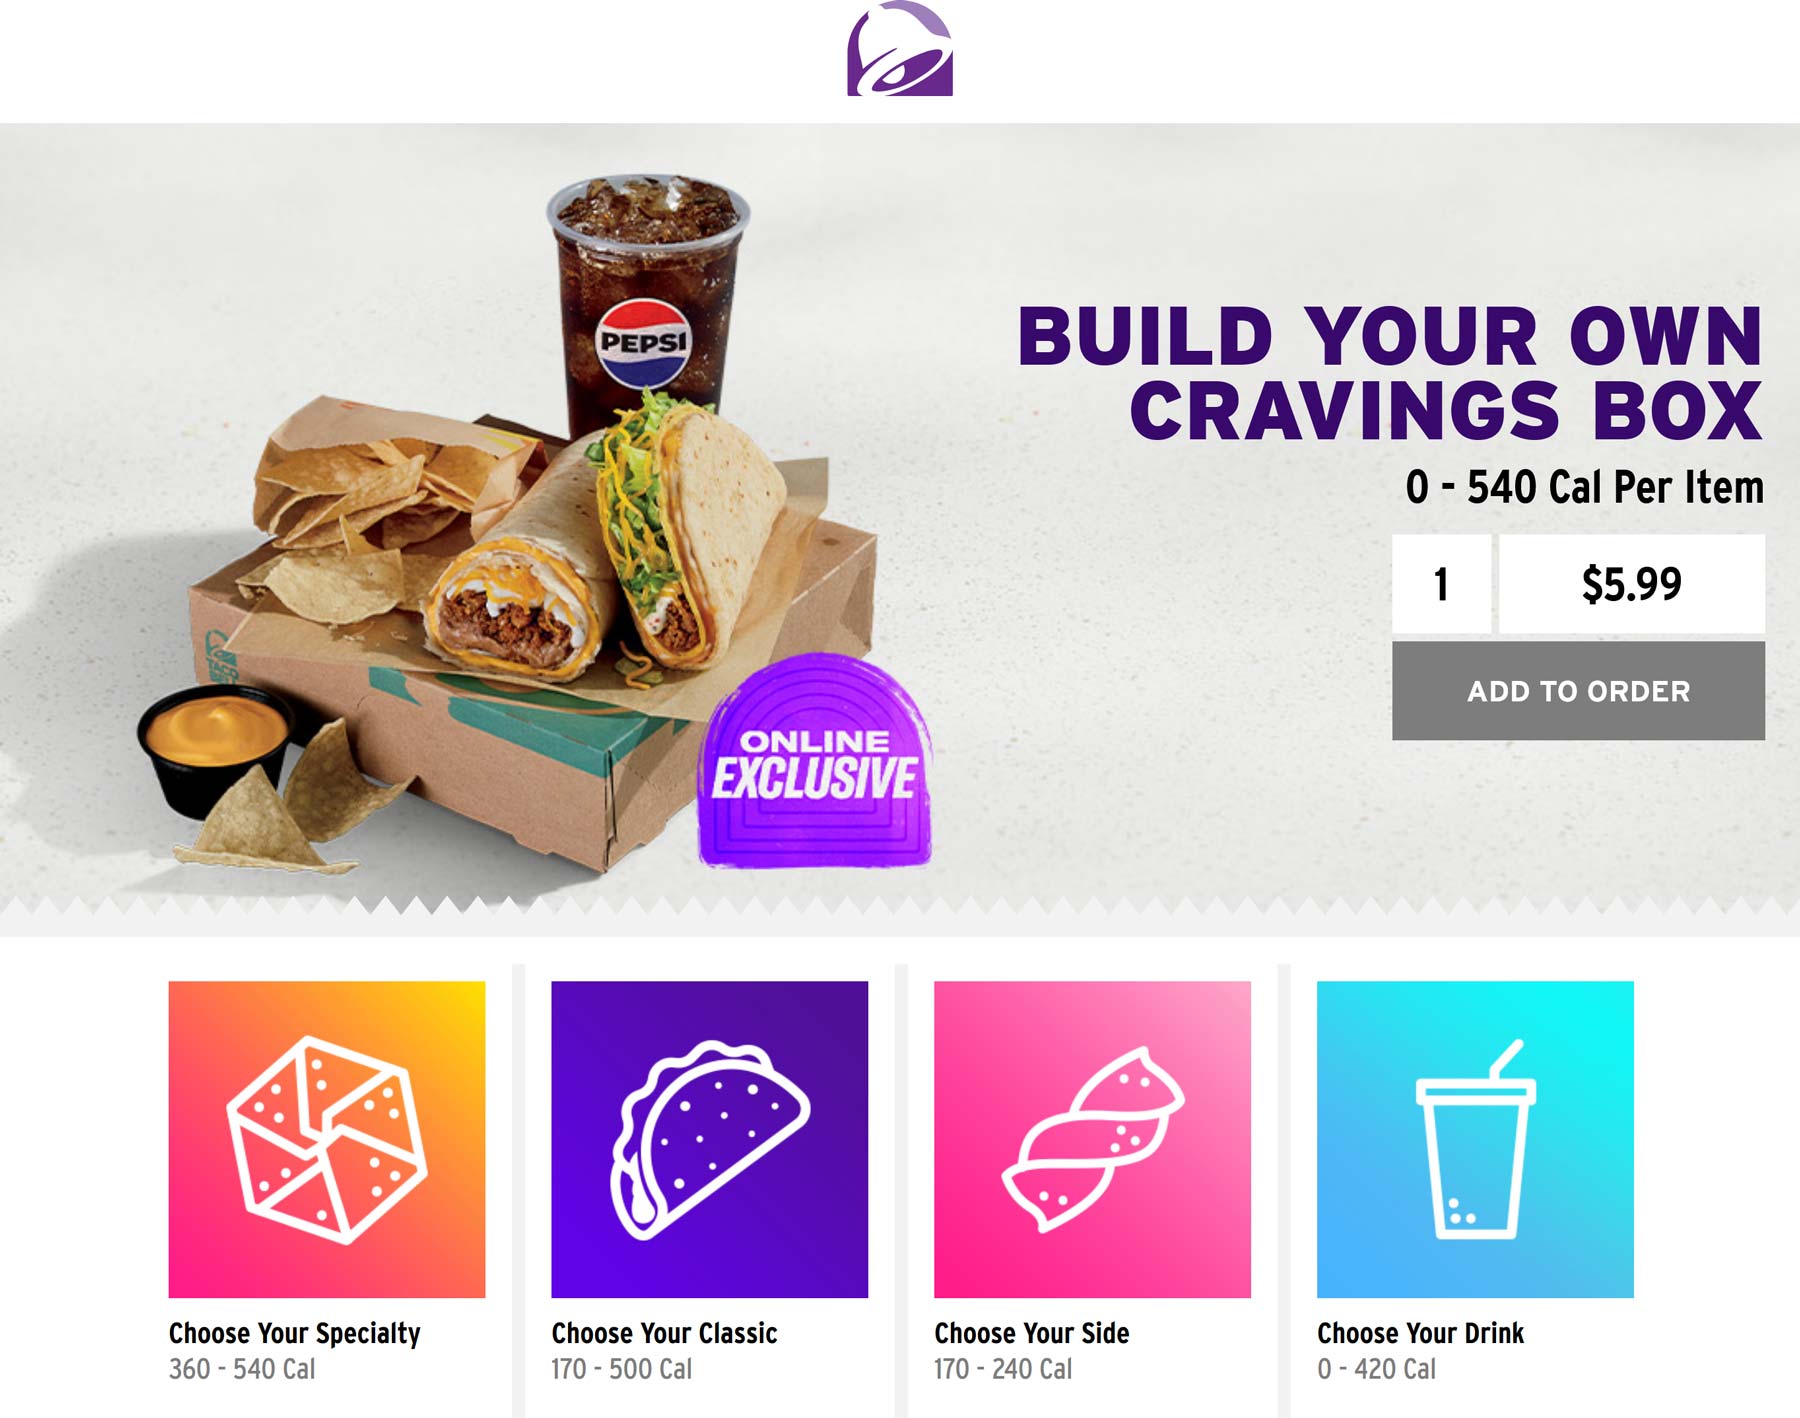 Taco Bell restaurants Coupon  Build your own cravings box meal for $6 online at Taco Bell #tacobell 